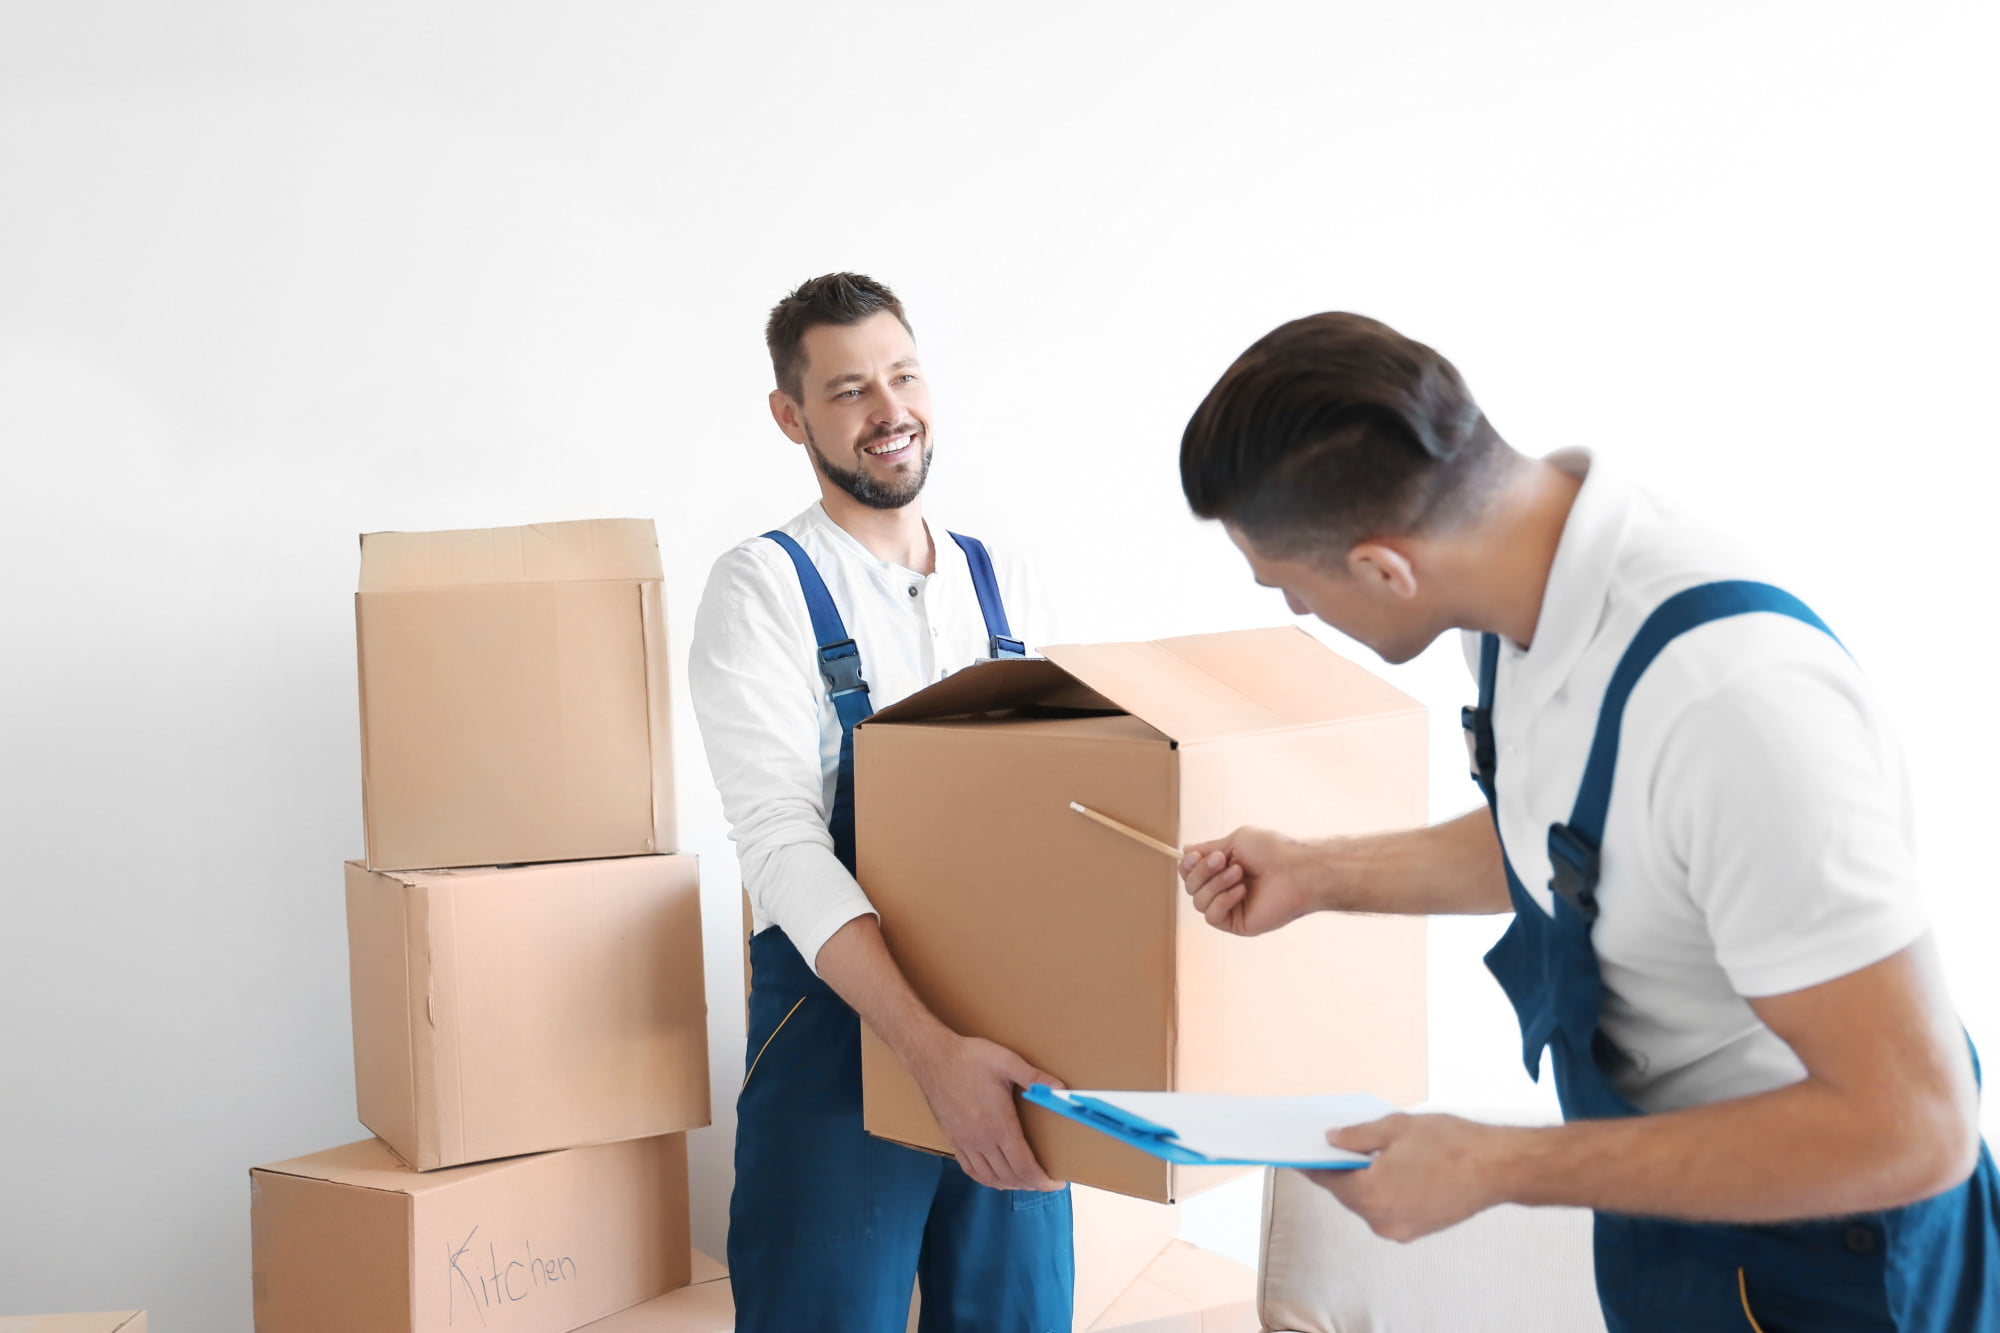 9 Tips for Choosing the Best Moving Companies for You